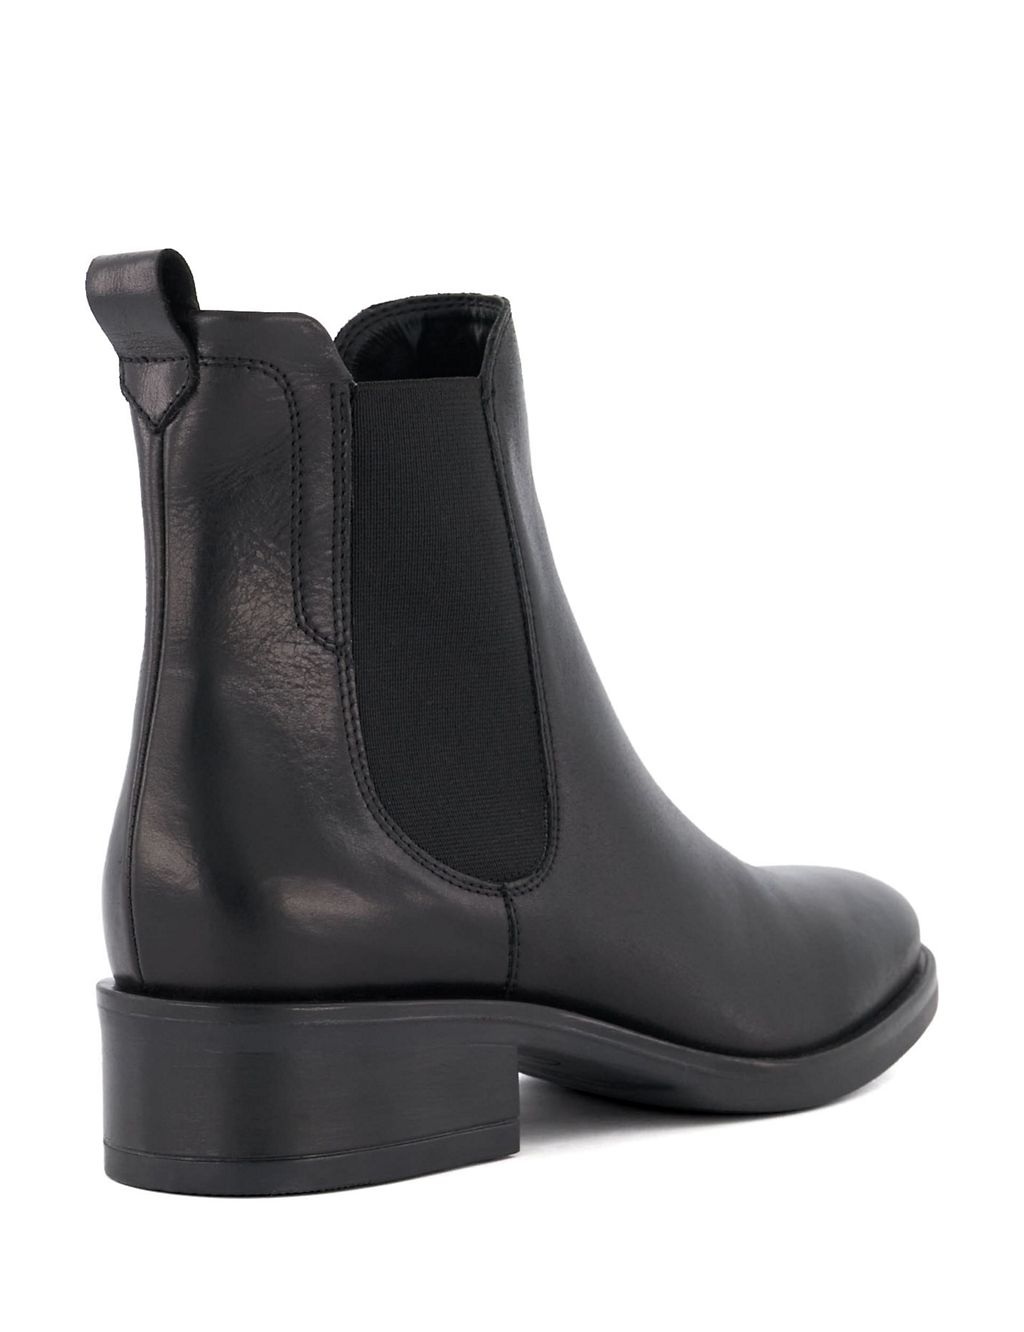 Leather Chelsea Flat Ankle Boots | Dune London | M&S